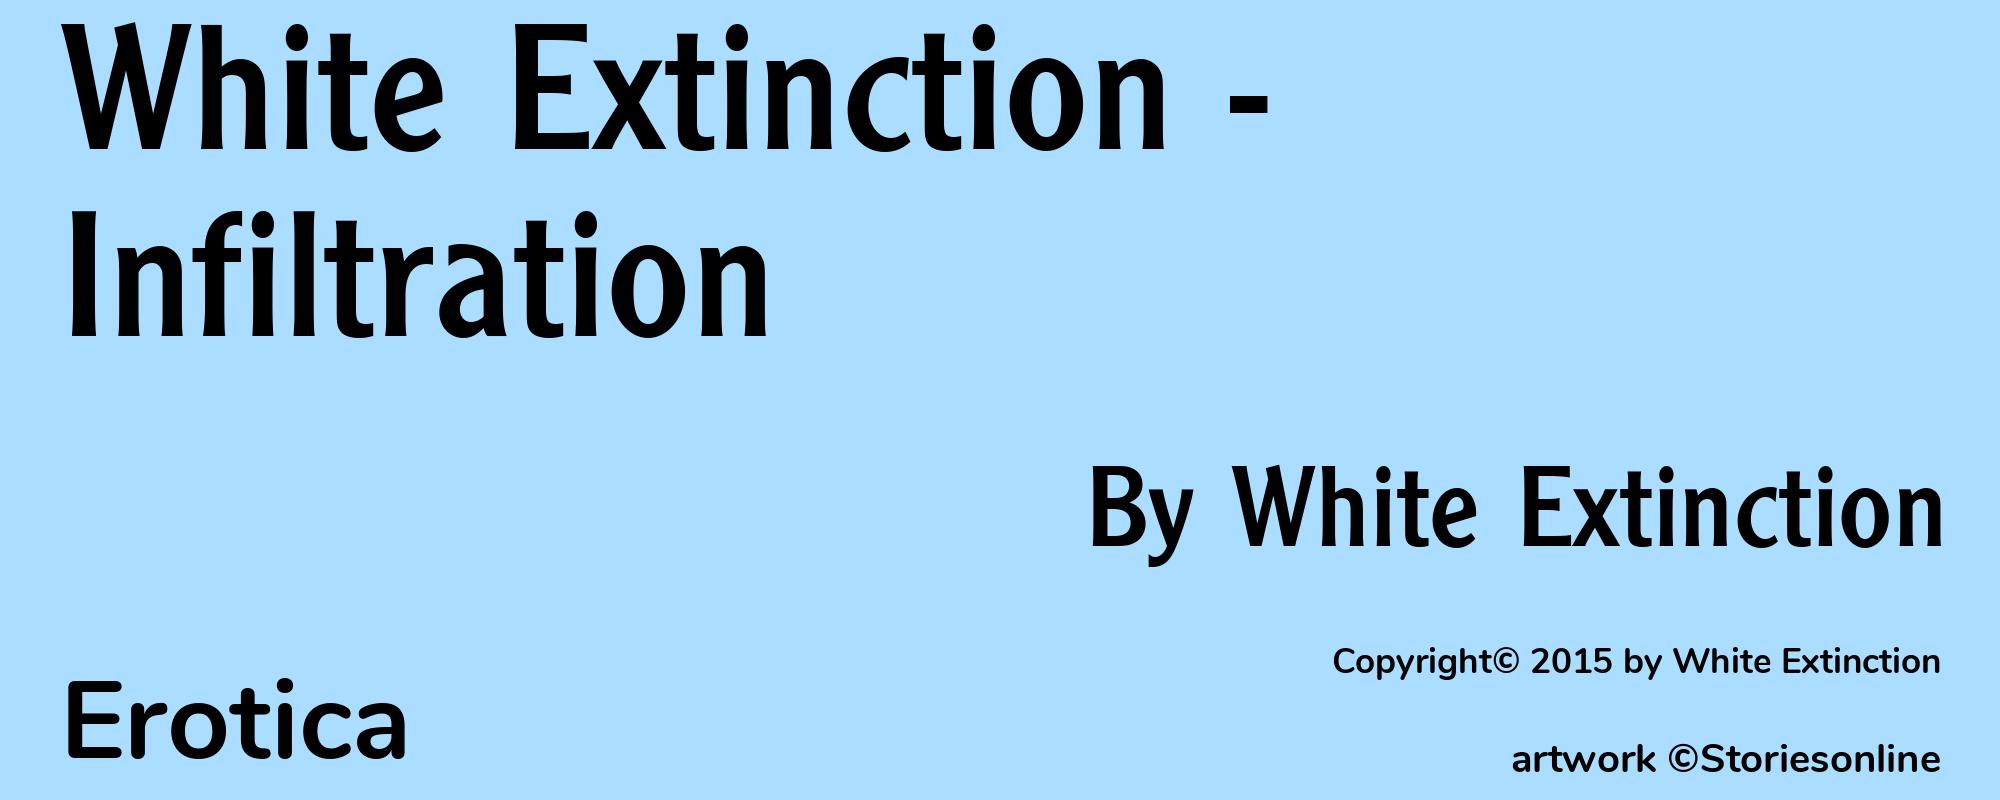 White Extinction - Infiltration - Cover